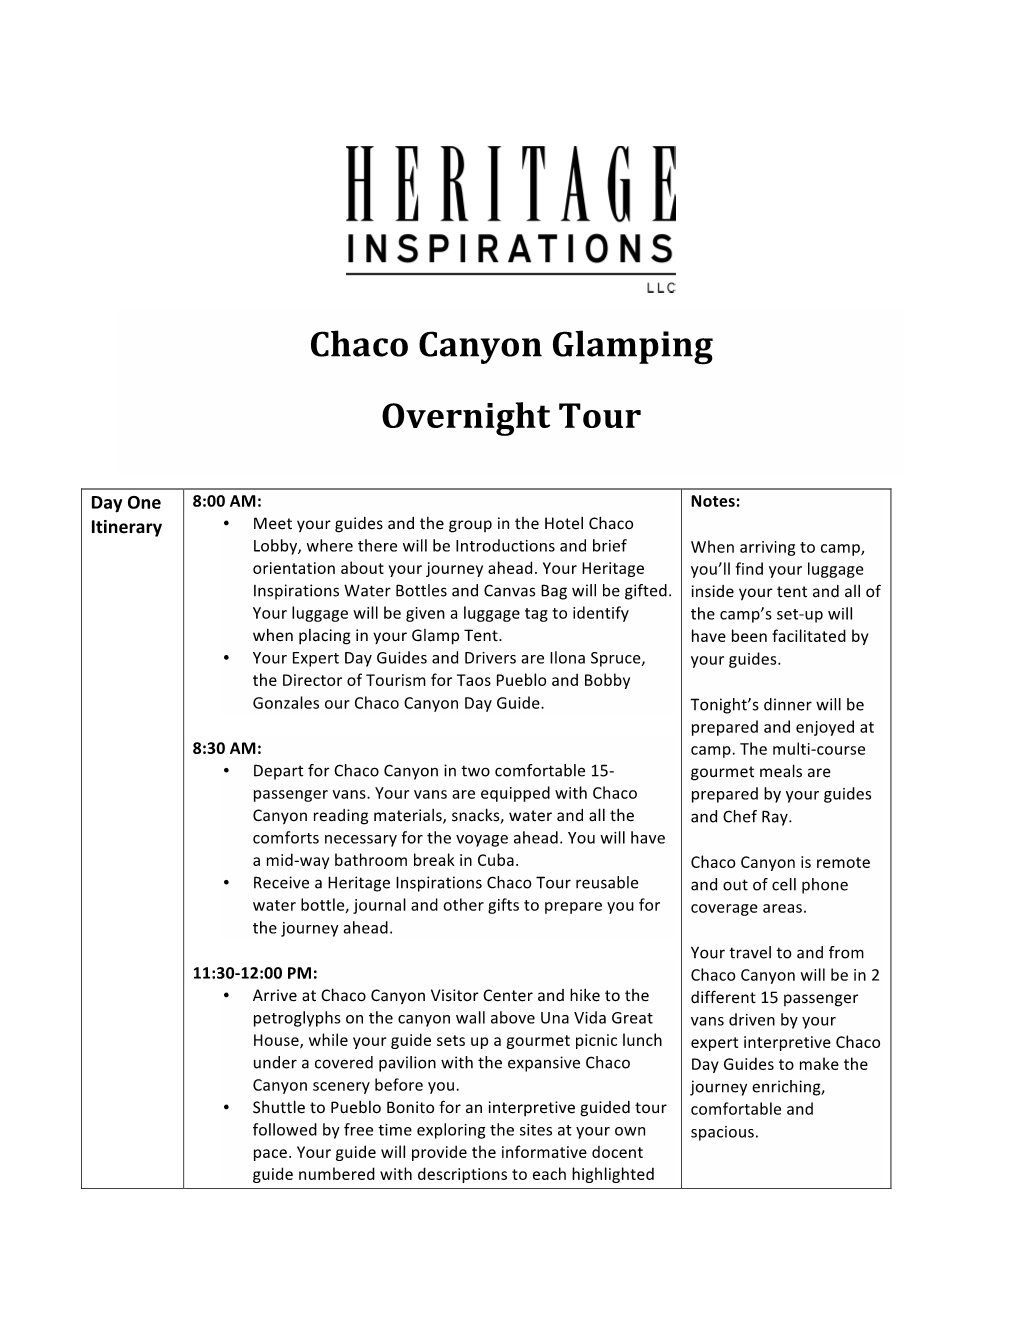 Chaco Canyon Glamping Overnight Tour